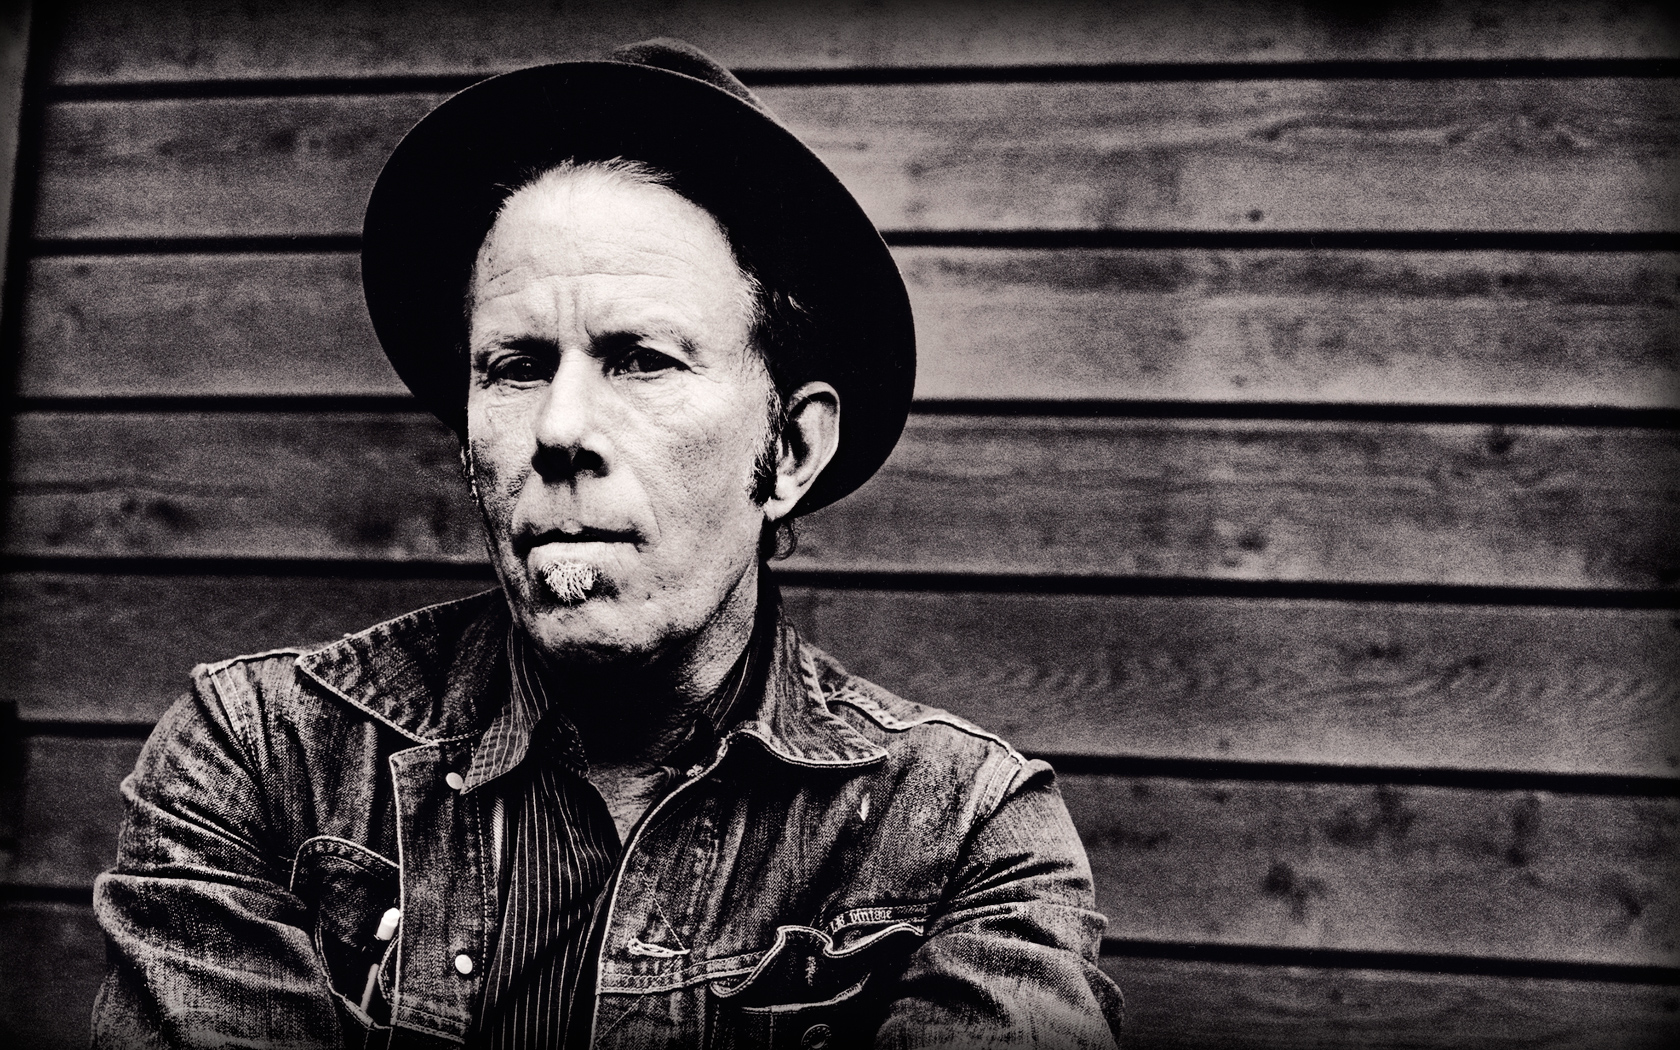 Trans-contextual Thinking and the Genius of Tom Waits